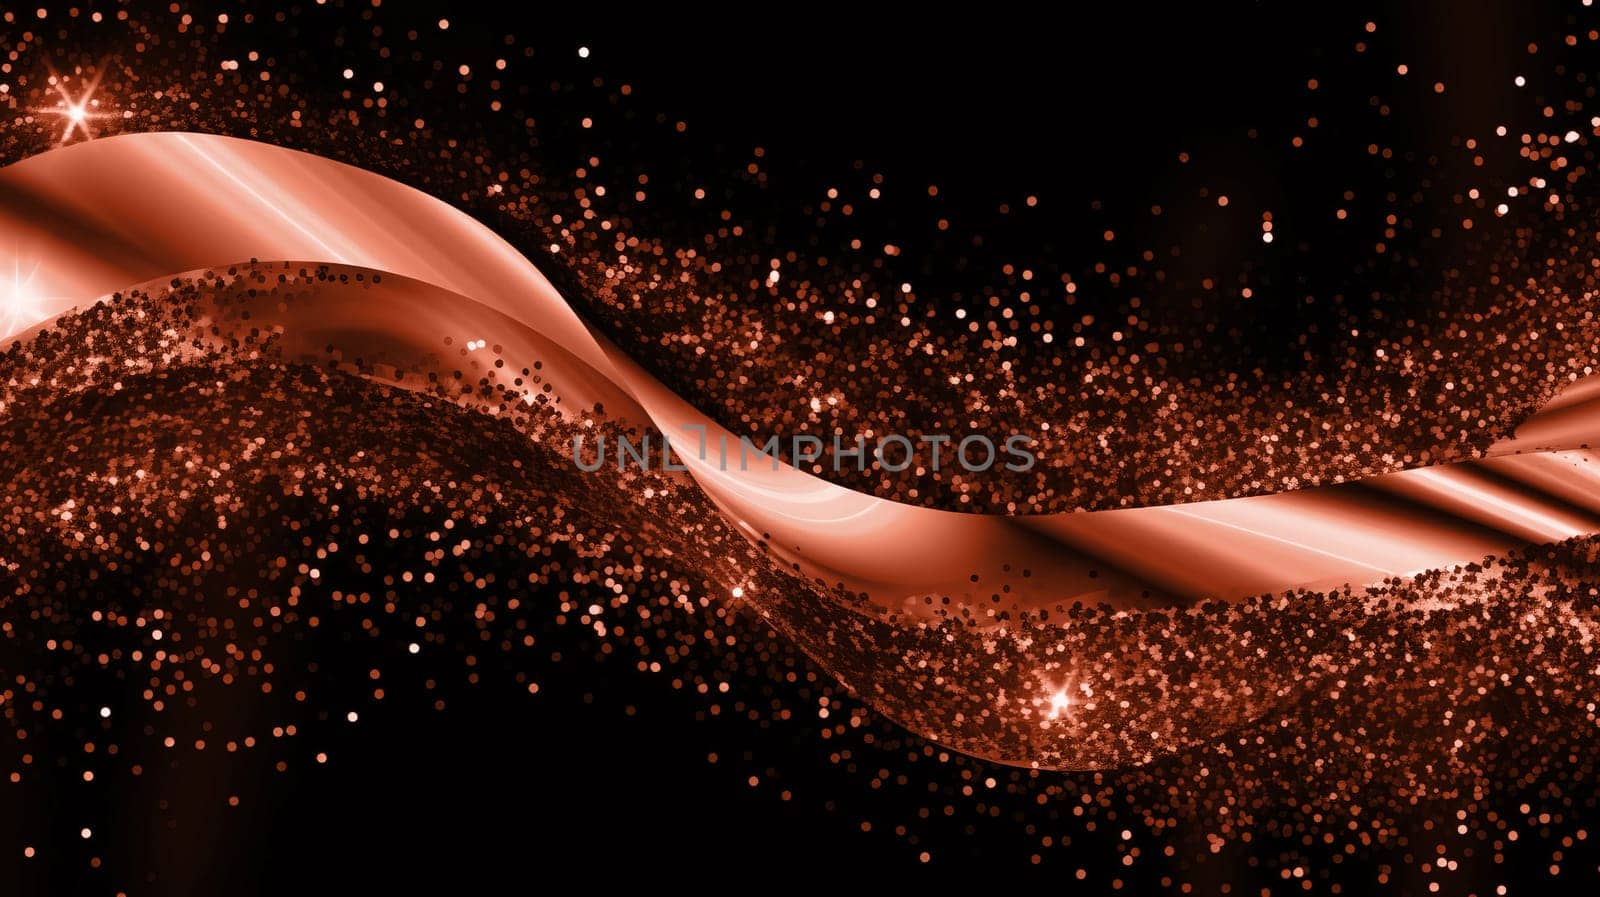 Digital texture with shimmer and sparkles in black and peach colors.